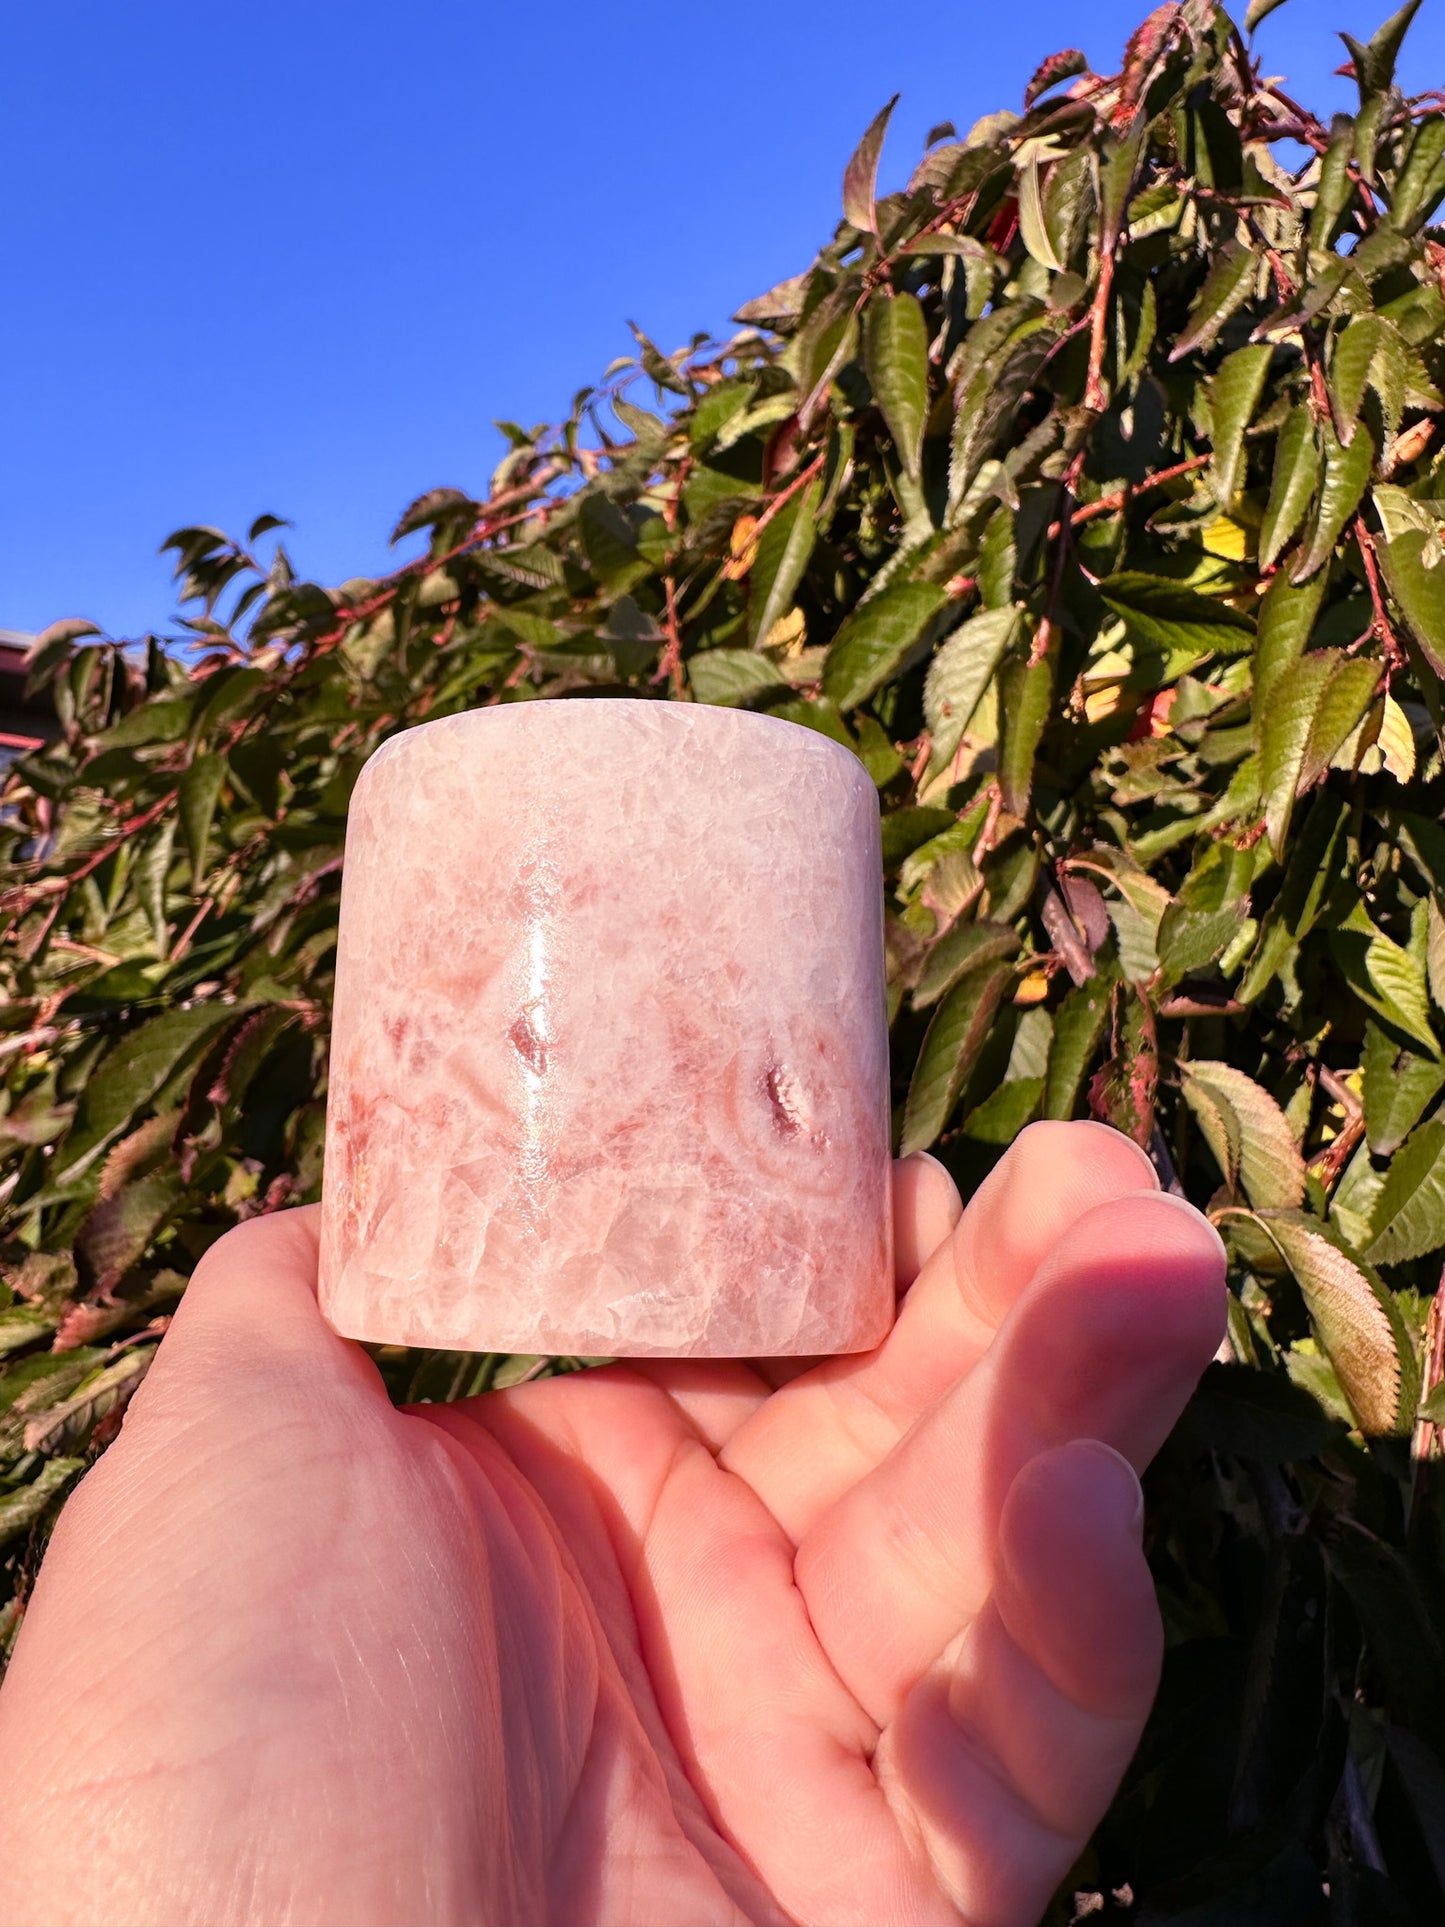 Adorable Pink Calcite Candleholder (#275)